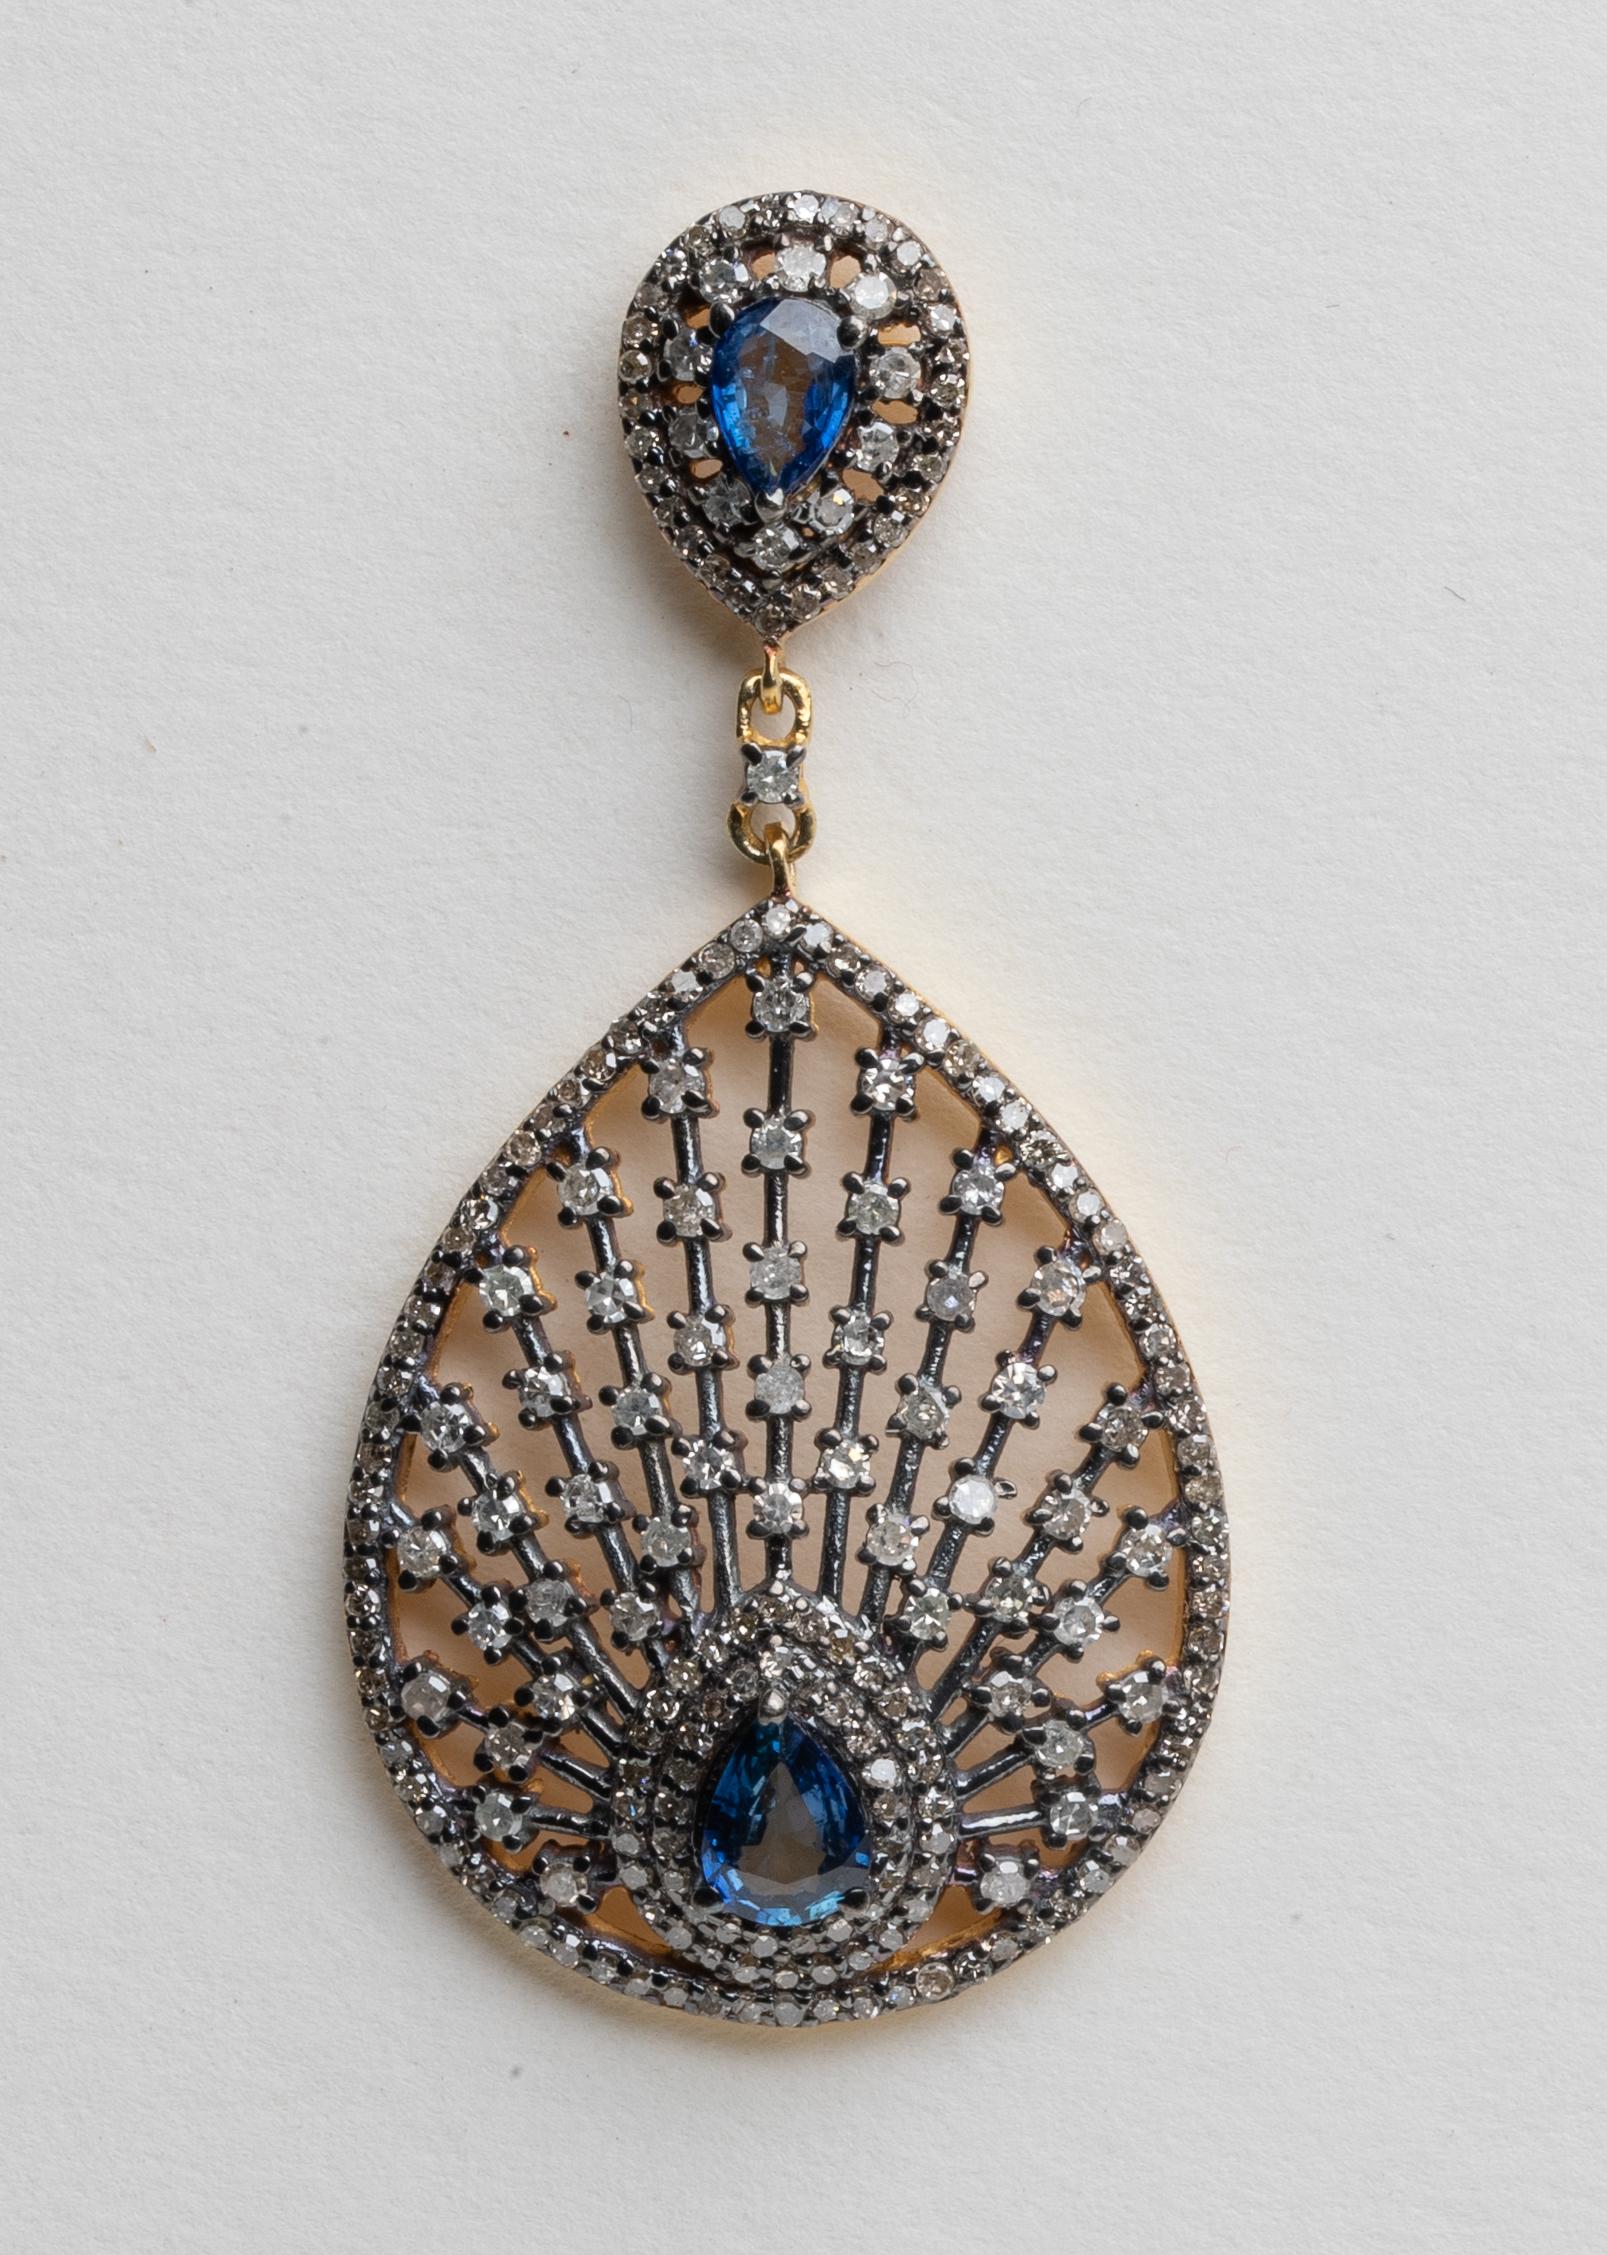 A lovely pear-shaped post and drop earring with faceted blue sapphires and round-cut diamonds radiating outward.  Set in vermeil with an 18K gold post for pierced ears.  Carat weight of sapphires is 2.15; diamonds total 3.34 carats.